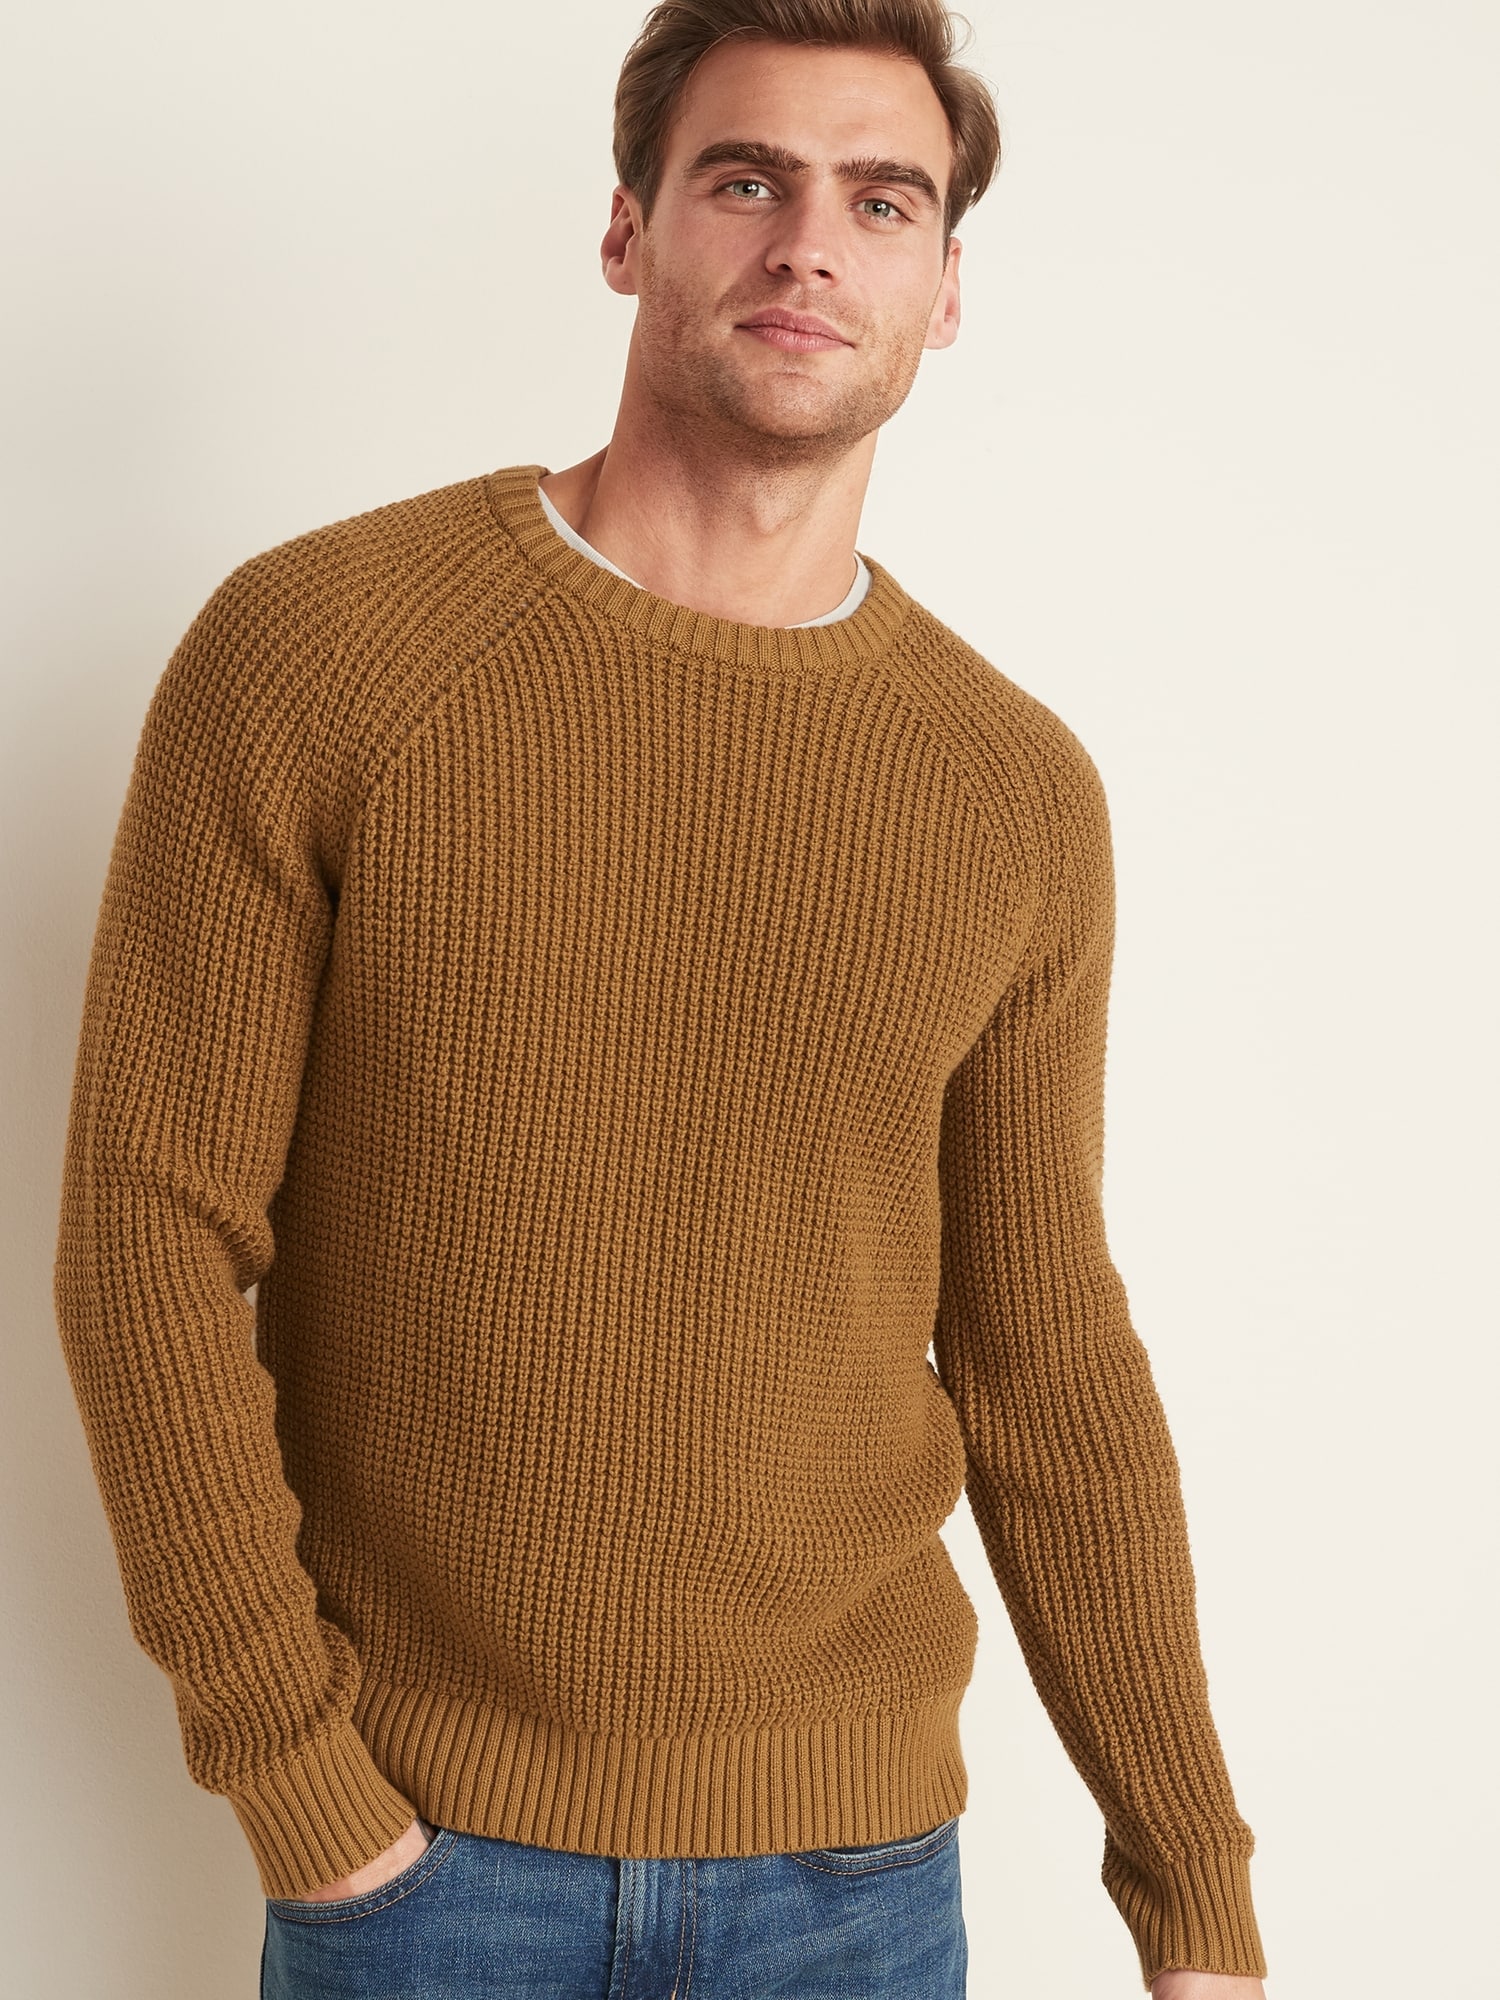 Textured Waffle-Knit Sweater